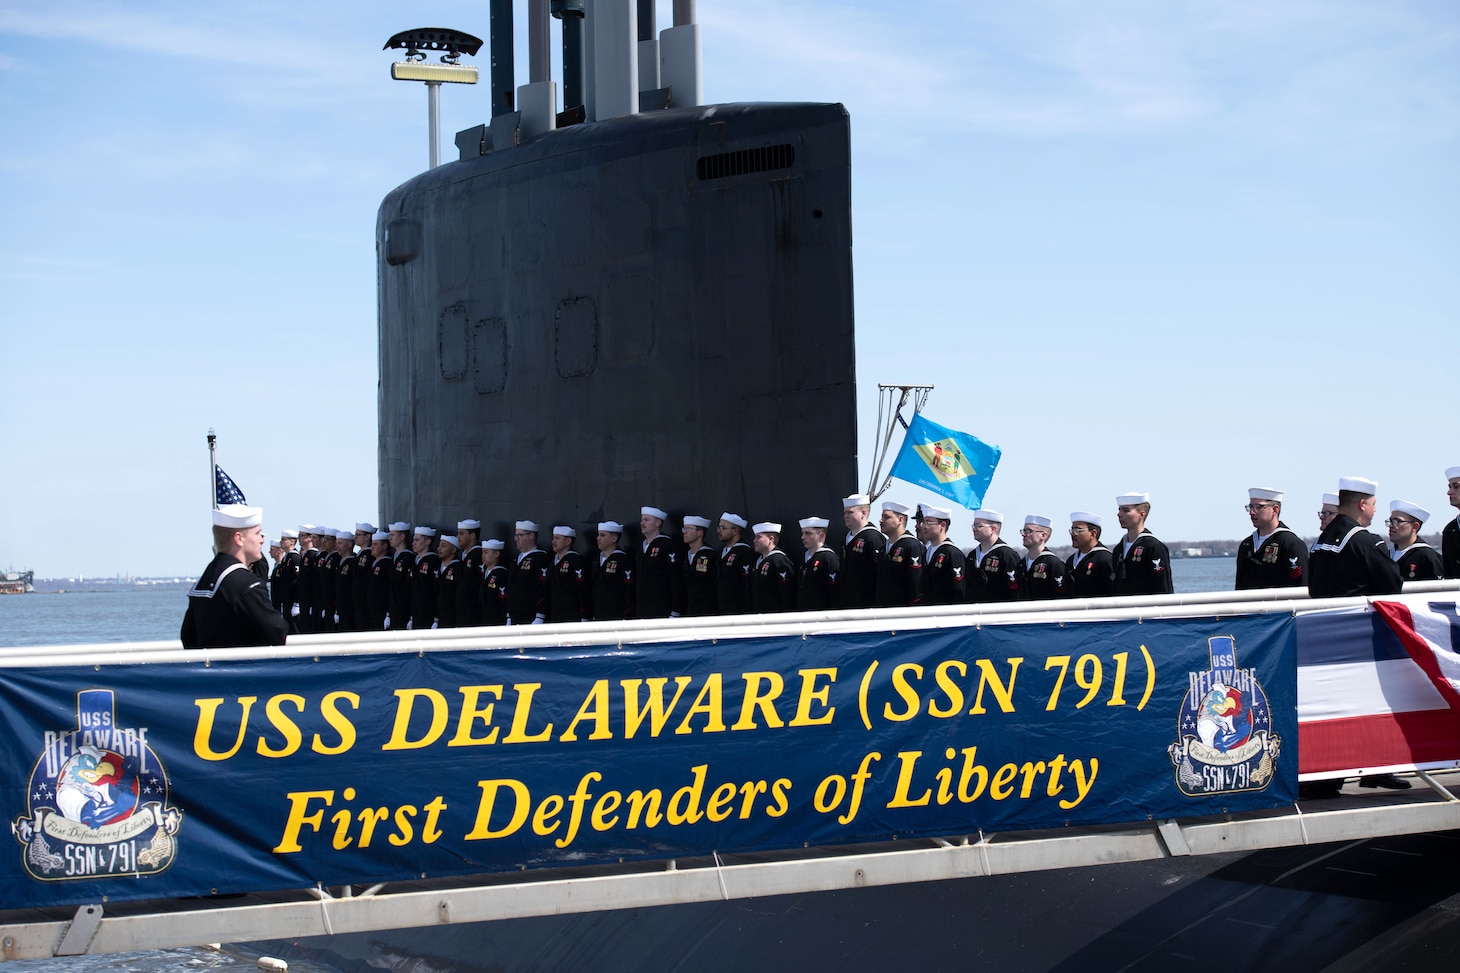 The crew of the Virginia-class submarine USS Delaware (SSN 791) board the ship during a commissioning commemoration ceremony in Wilmington, Delaware April 2, 2022.